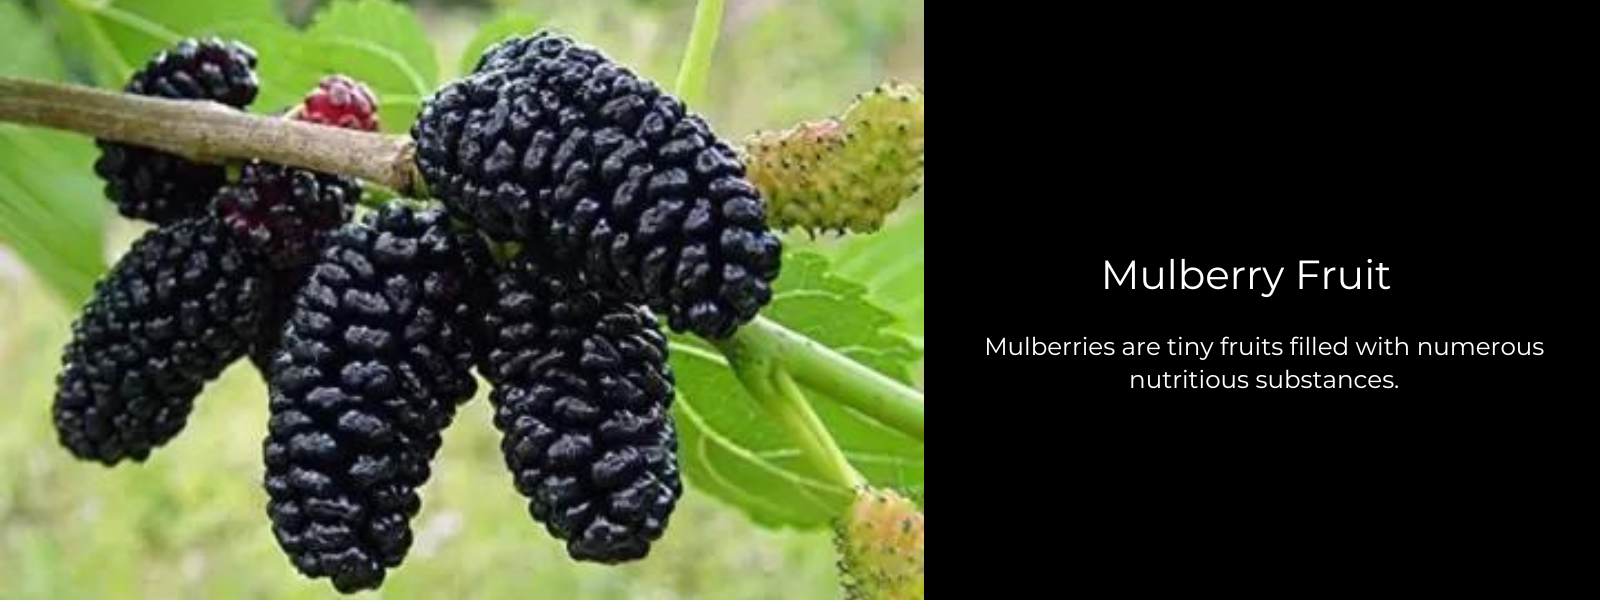 Mulberry Fruit – Health Benefits, Uses and Important Facts